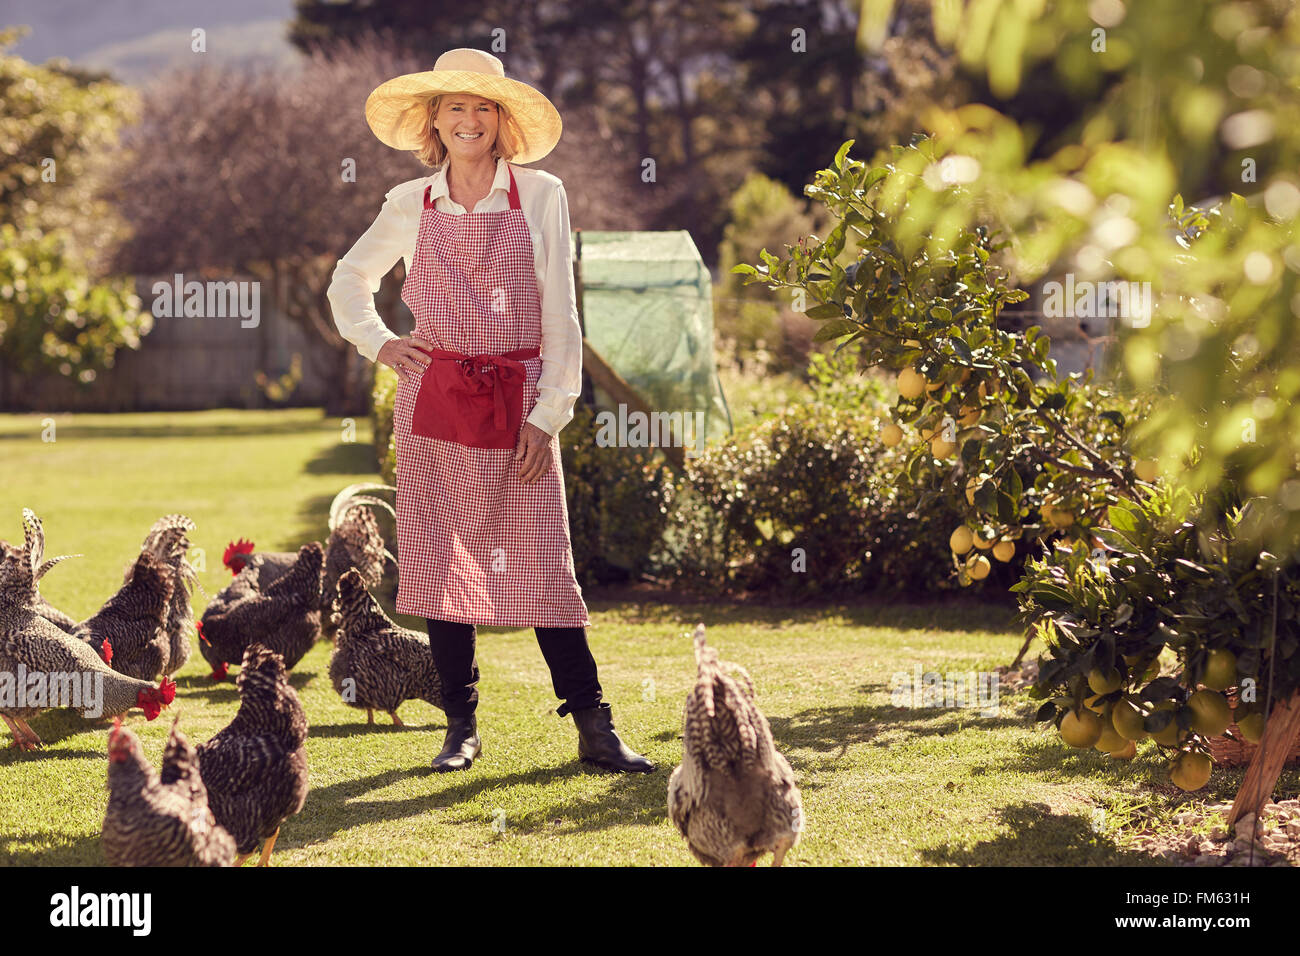 Senior woman with her chickens in backyard Stock Photo